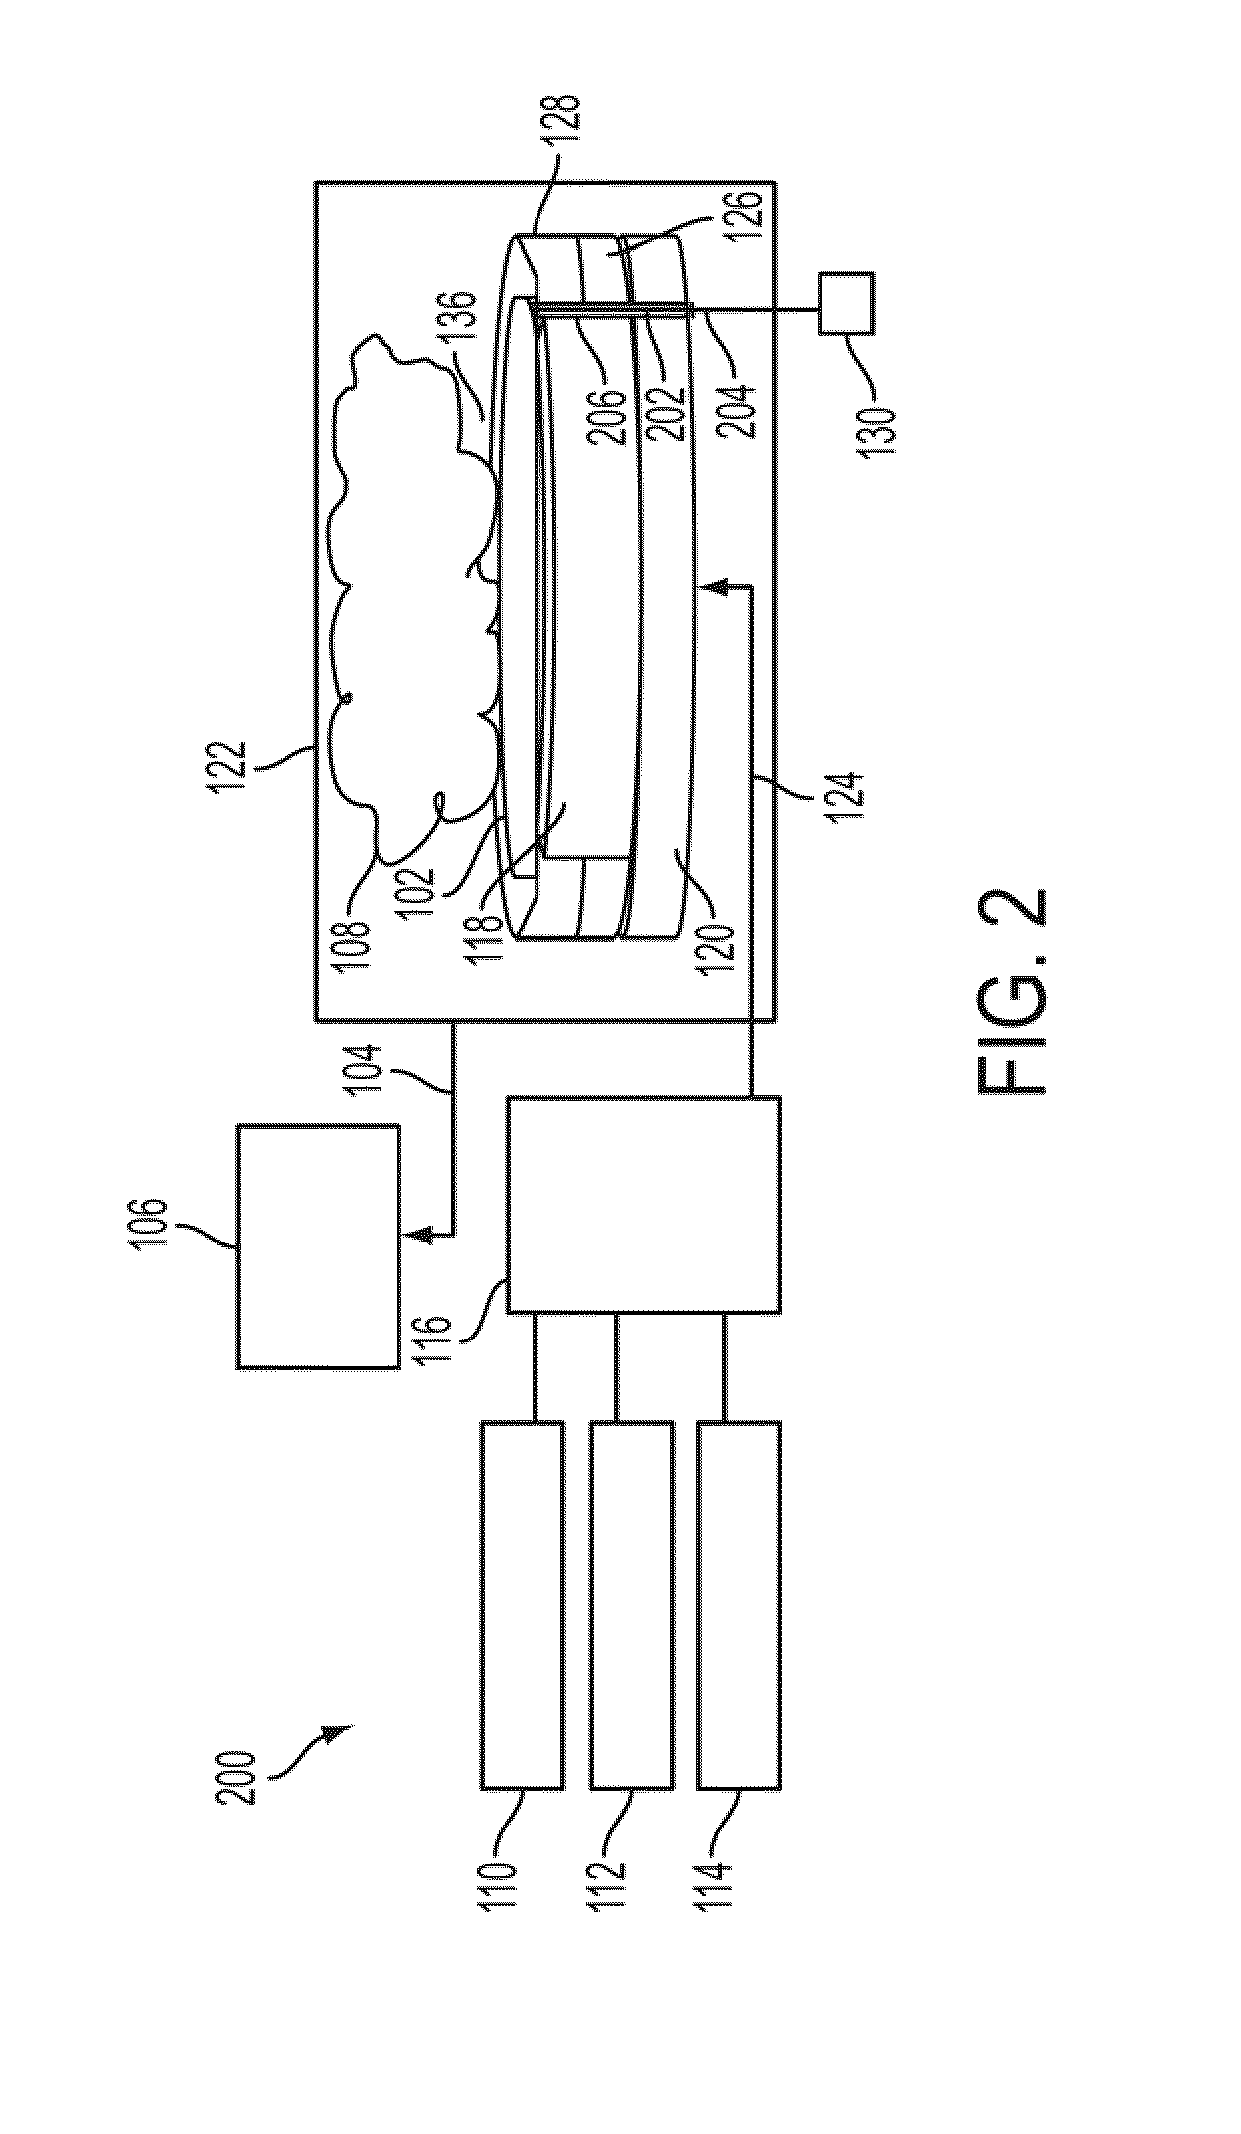 Method and apparatus for measuring wafer bias potential